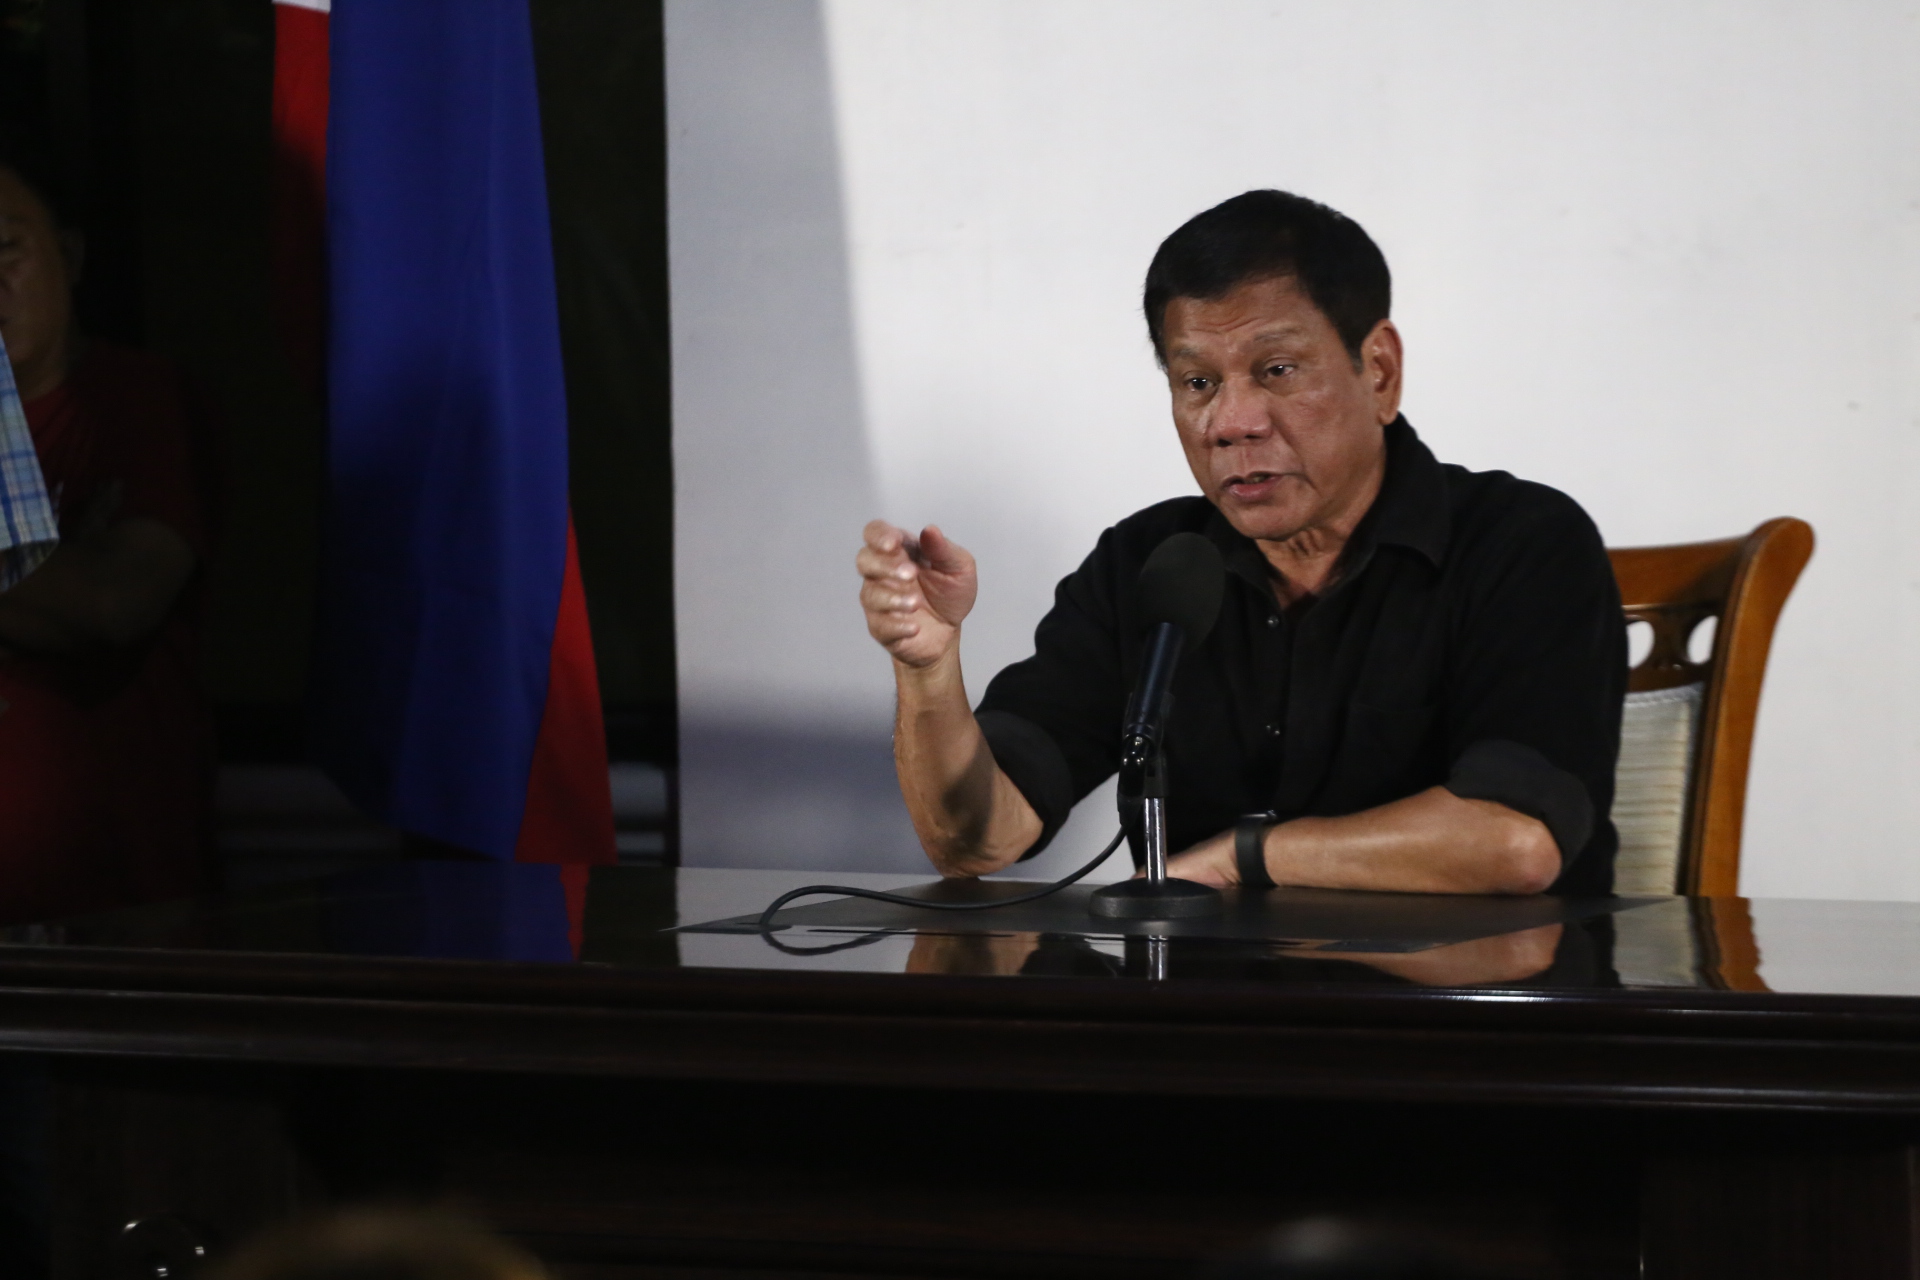 Will the number killed drug suspects continue to rise once Duterte is seated as president? Photo by Manman Dejeto/Rappler 